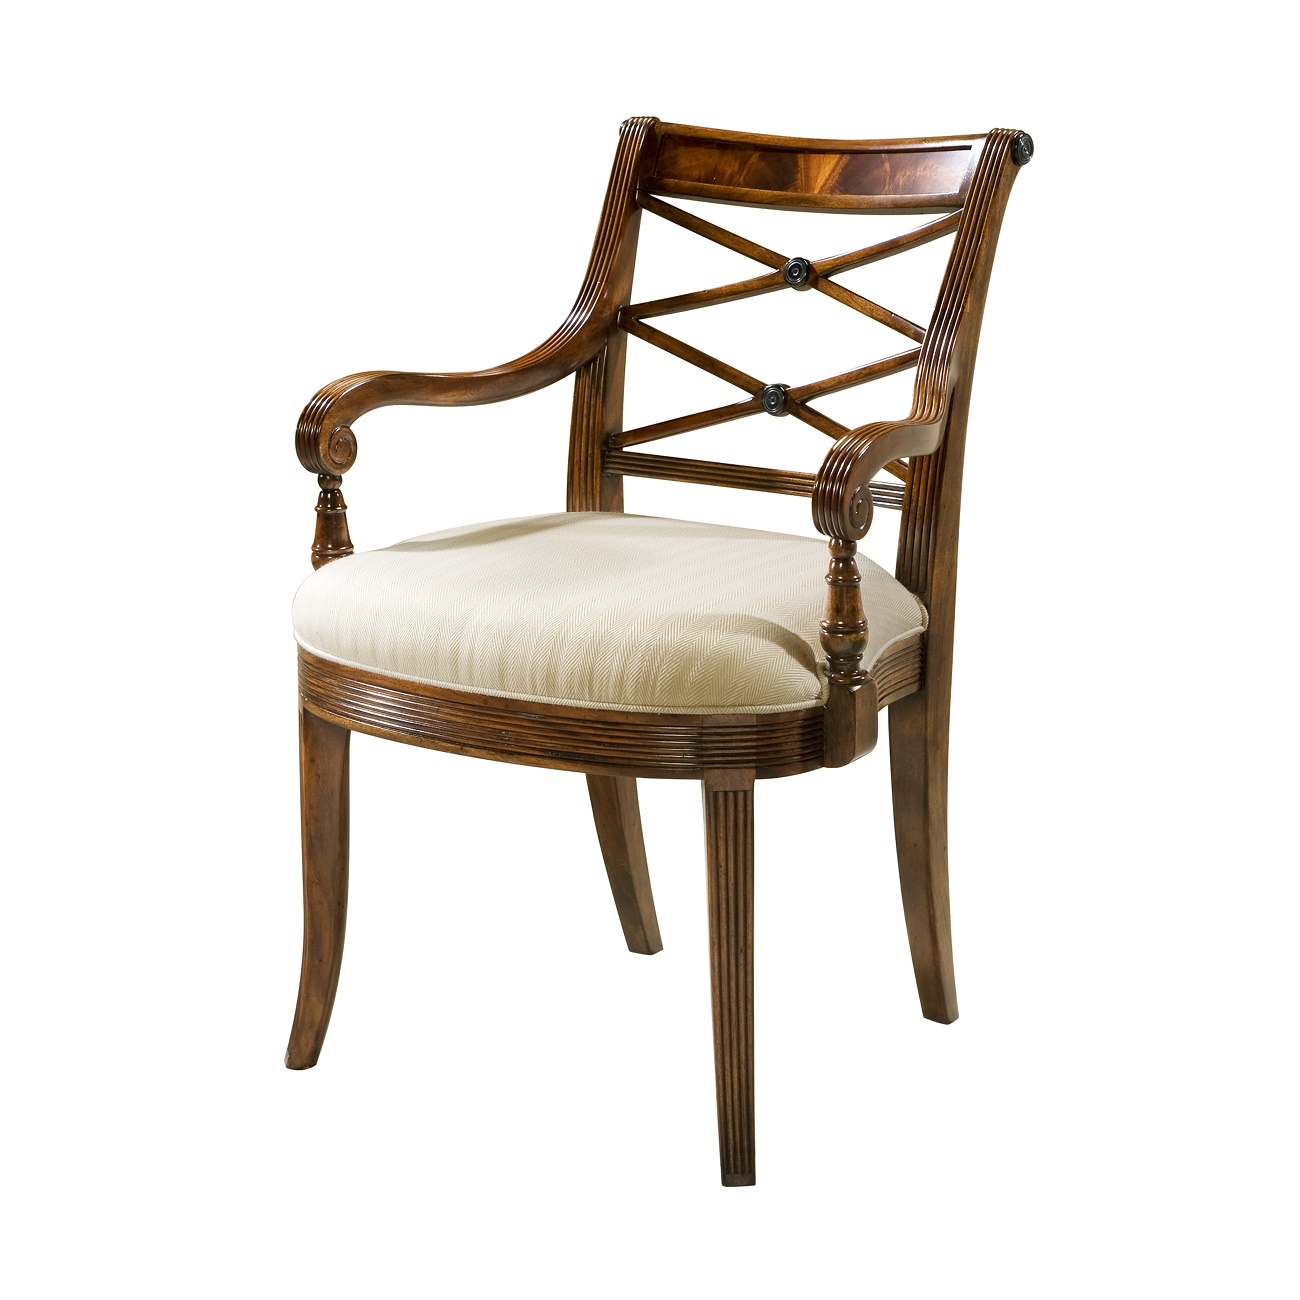 The Regency Visitor's Armchair, Theodore Alexander ArmChair, Brooklyn, New York, Furniture by ABD